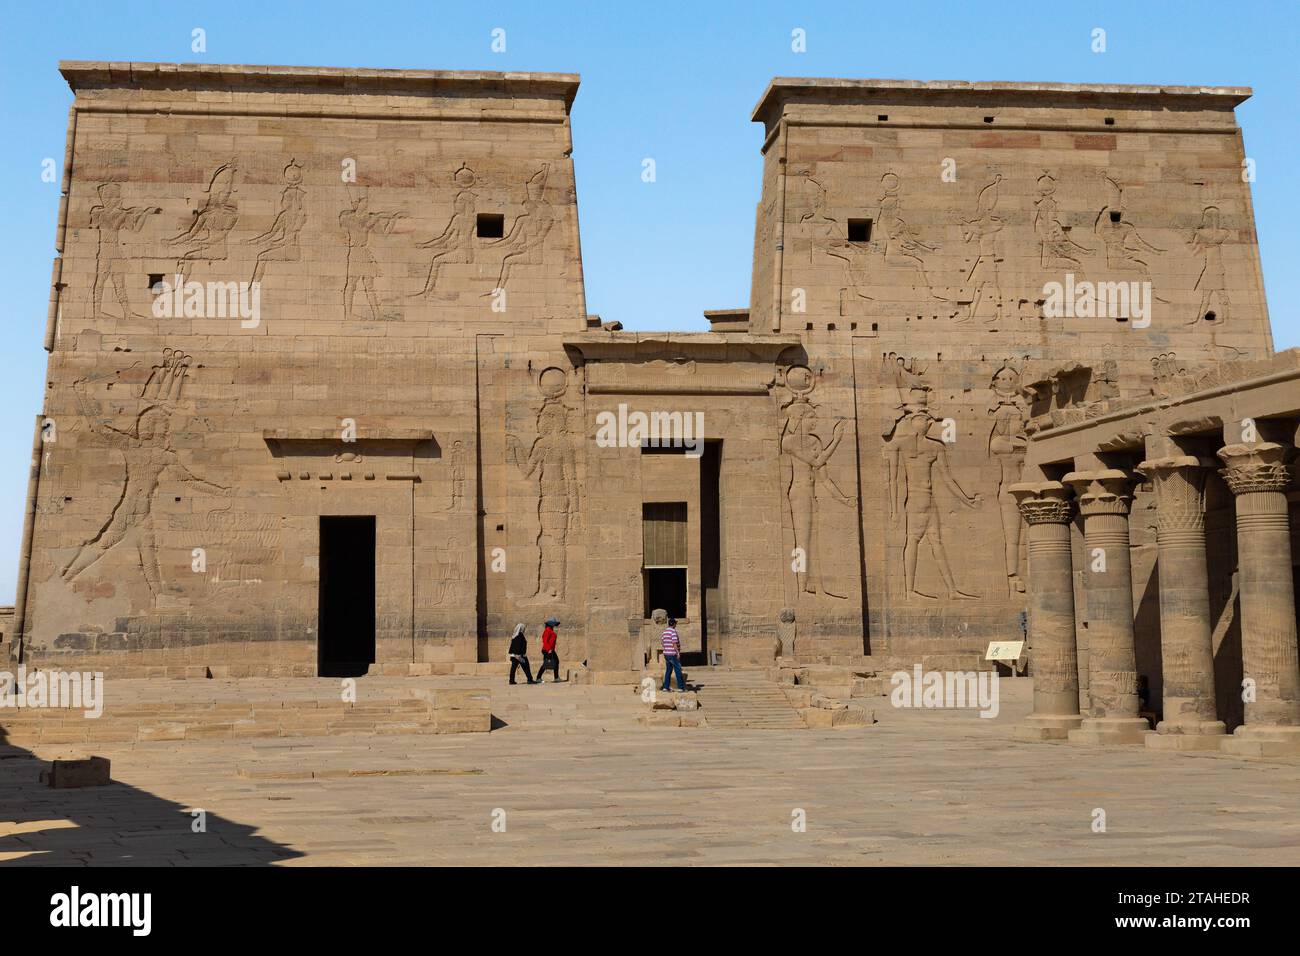 Tourists exploring the Philae Temple under a blue sky Stock Photo